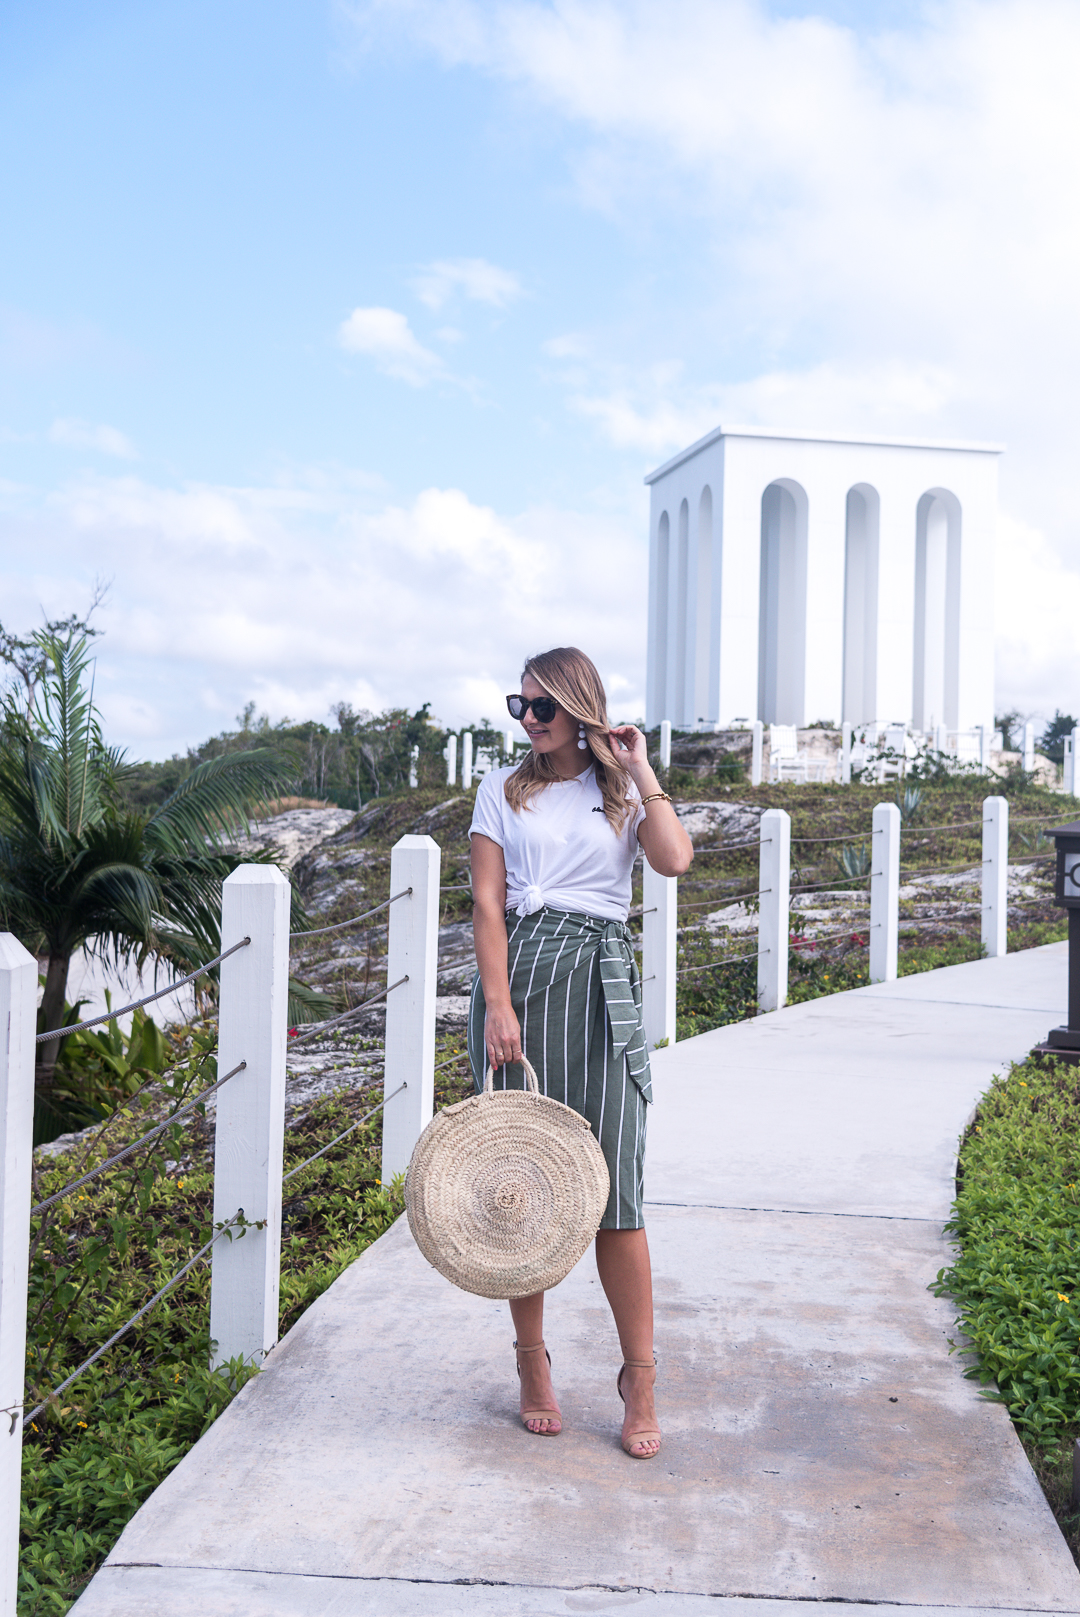 where to golf in the bahamas - baha mar resort review in the bahamas by popular Chicago travel blogger Visions of Vogue